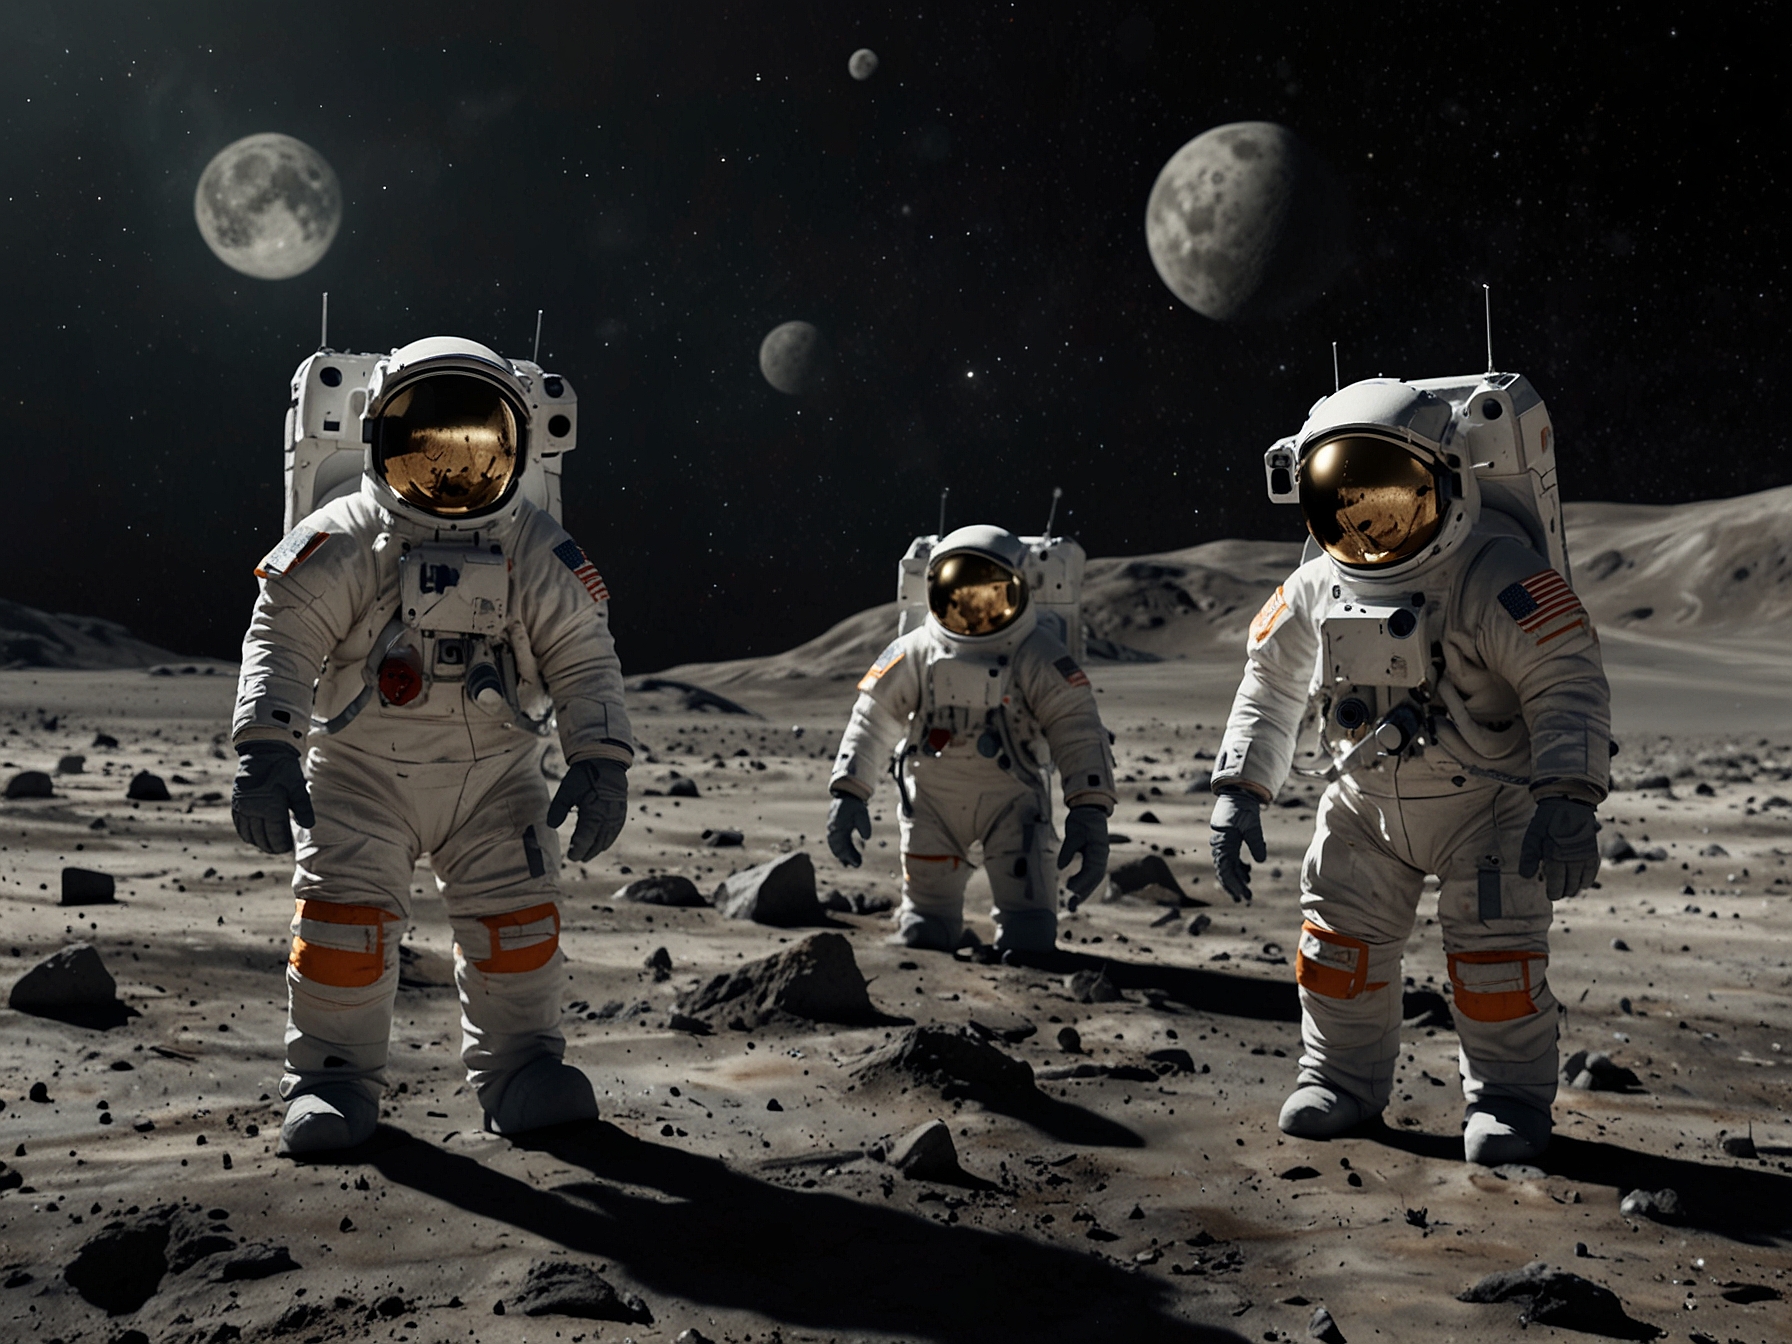 Illustration of Artemis astronauts on the lunar surface, highlighting their exposure to intense cosmic and solar radiation without Earth's protective magnetic field.